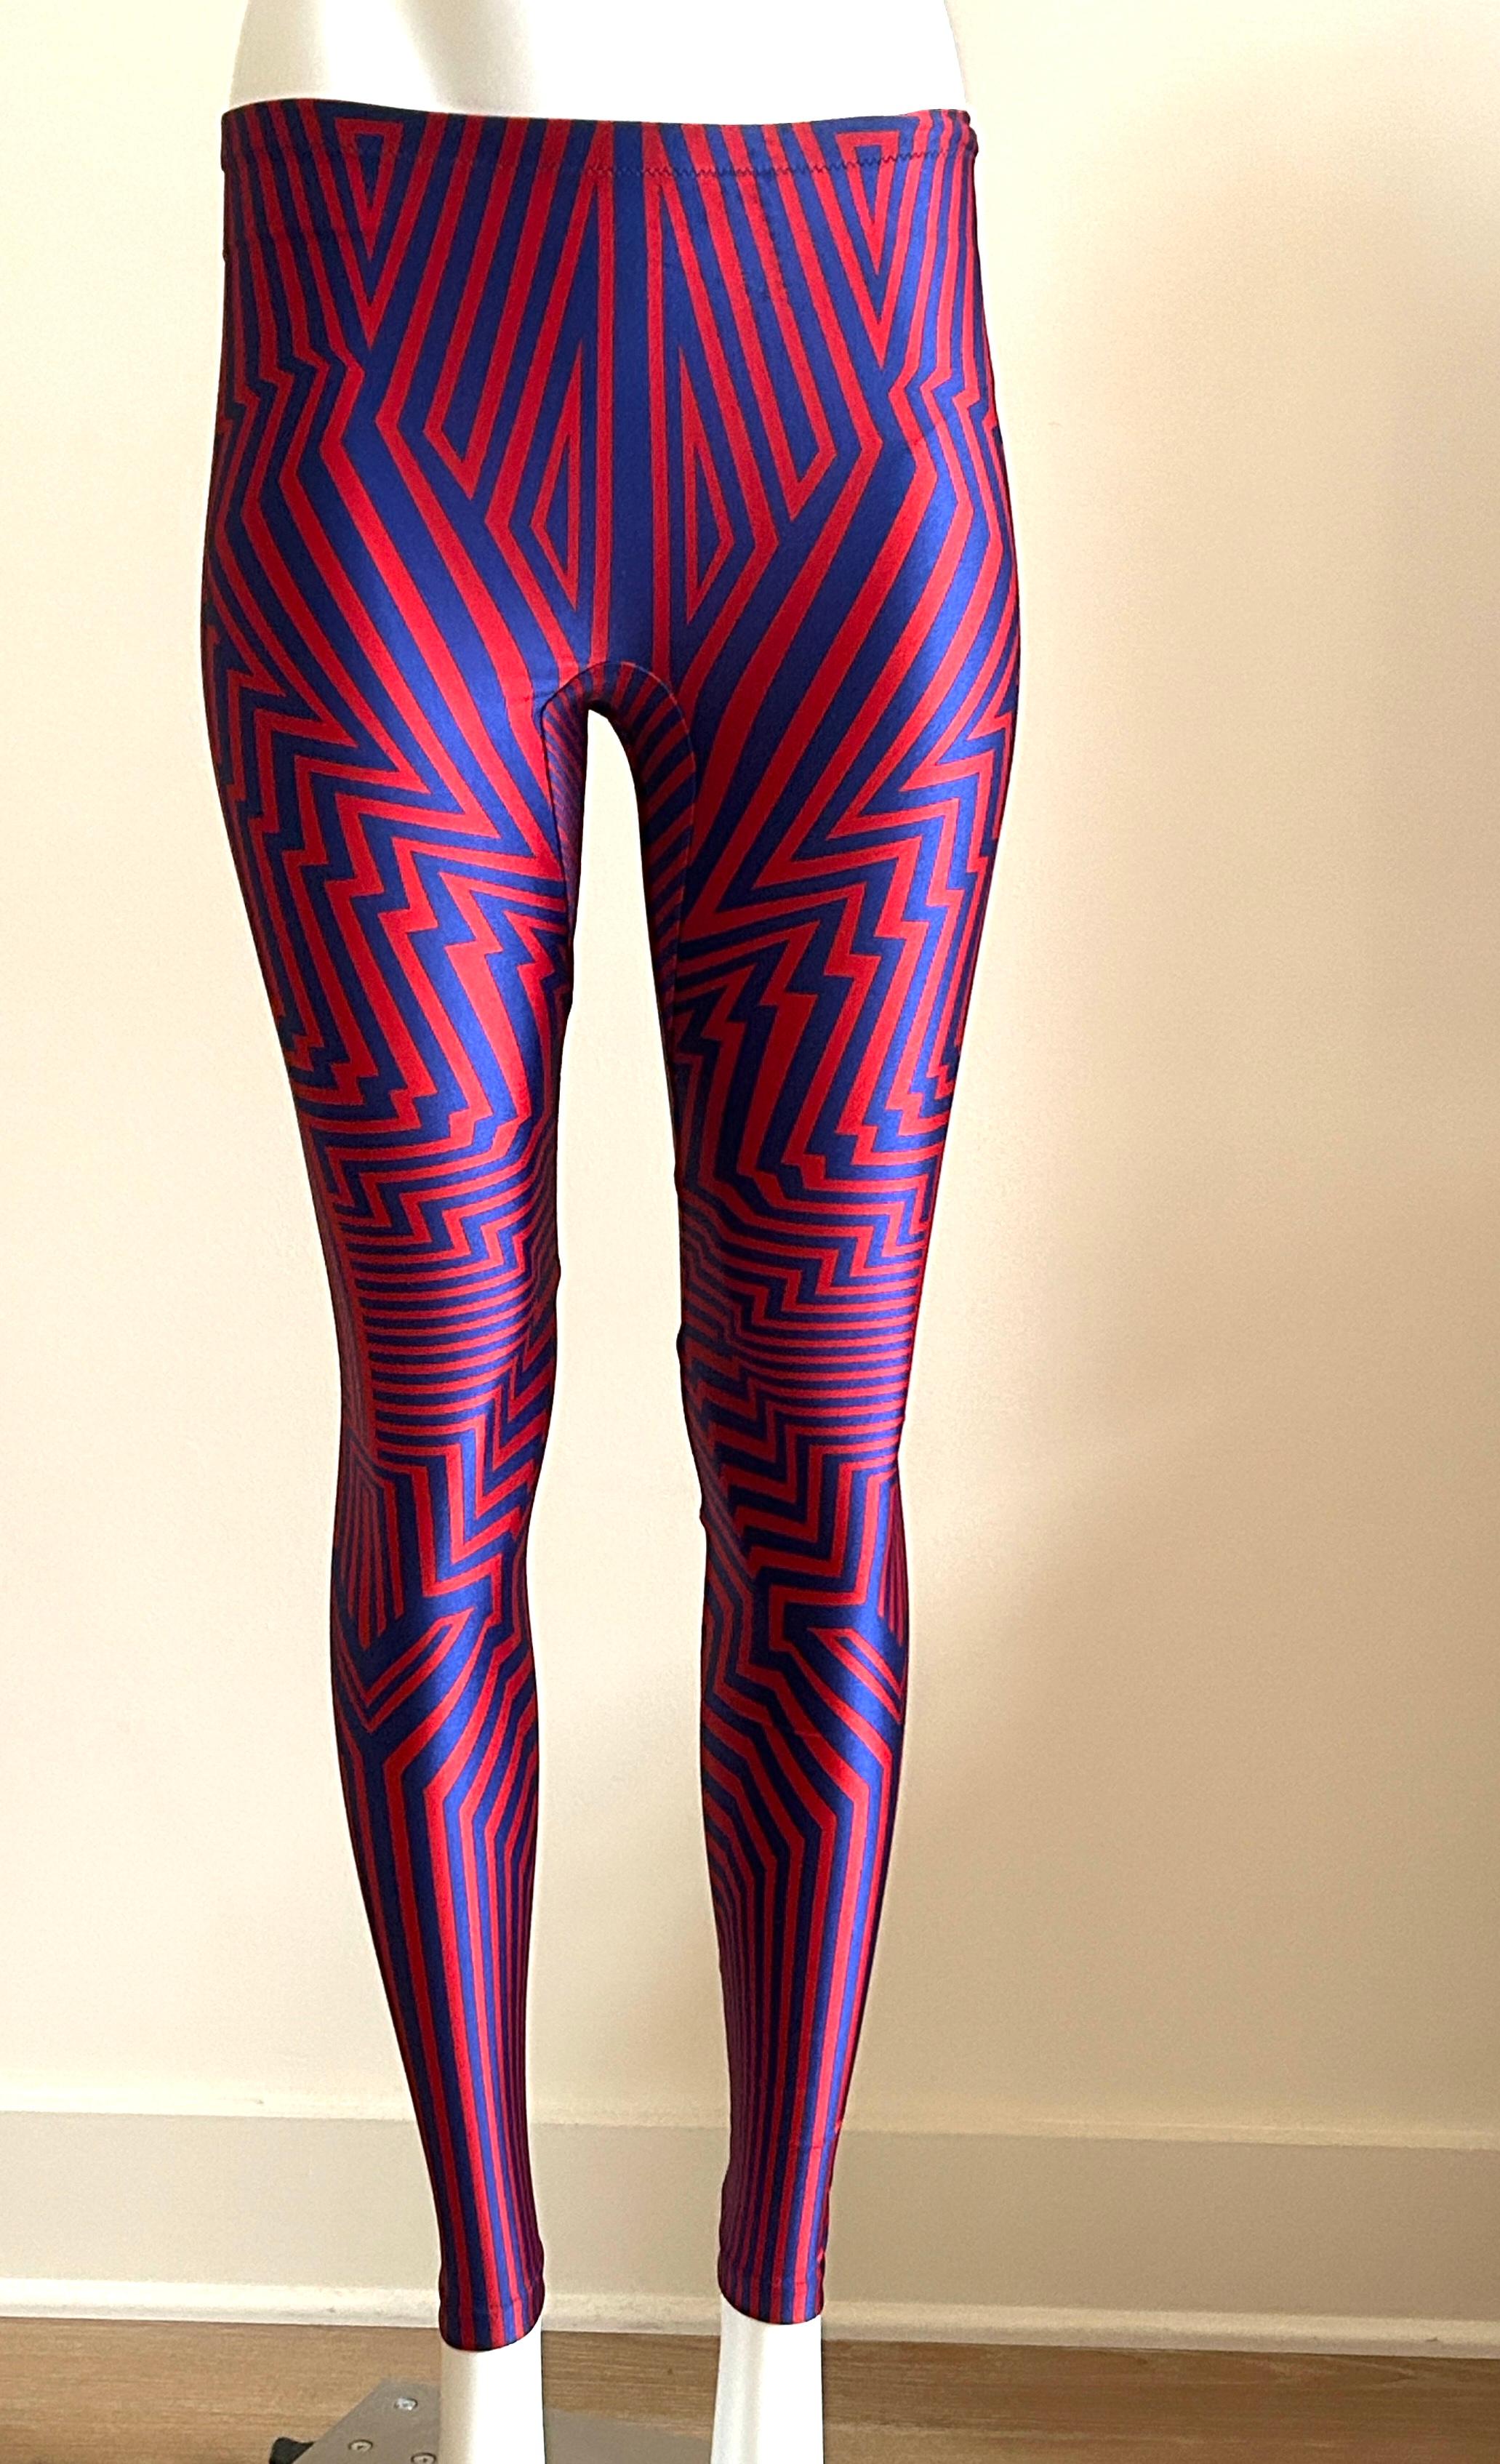 Alexander Mcqueen geometric print leggings in a red and blue maze like pattern from the Resort 2010 collection.

77% polyamide, 23% elastane. 

Made in Italy.

Size S. (Very stretchy.)
Waist 22